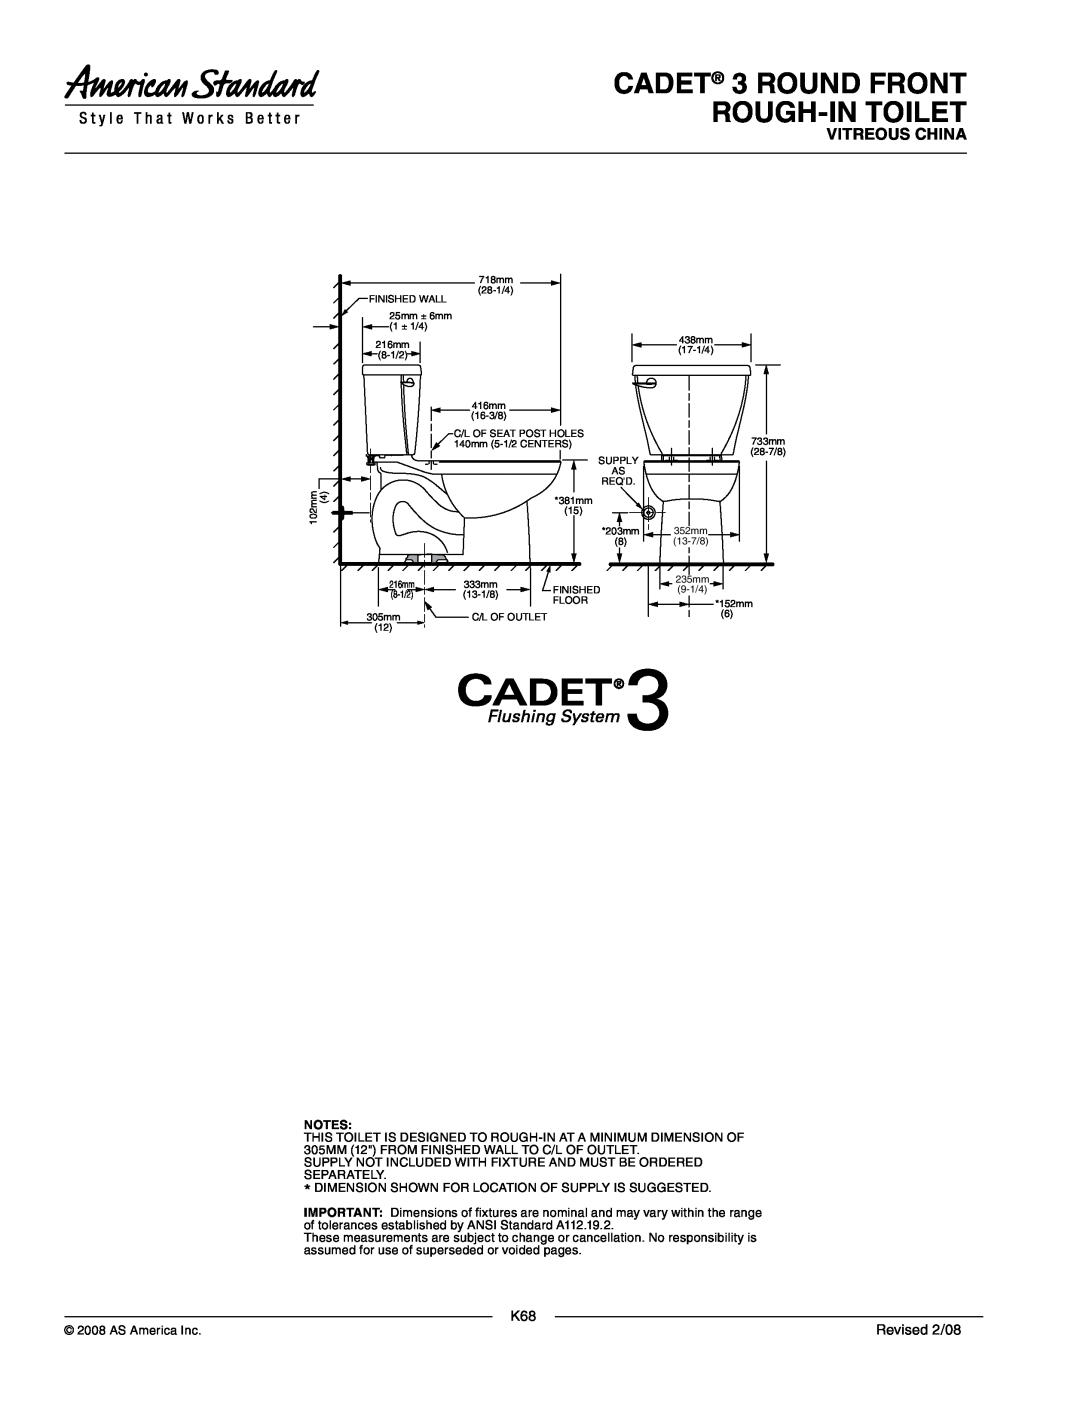 American Standard 2384.012 dimensions CADET 3 ROUND FRONT ROUGH-INTOILET, Vitreous China, Revised 2/08 